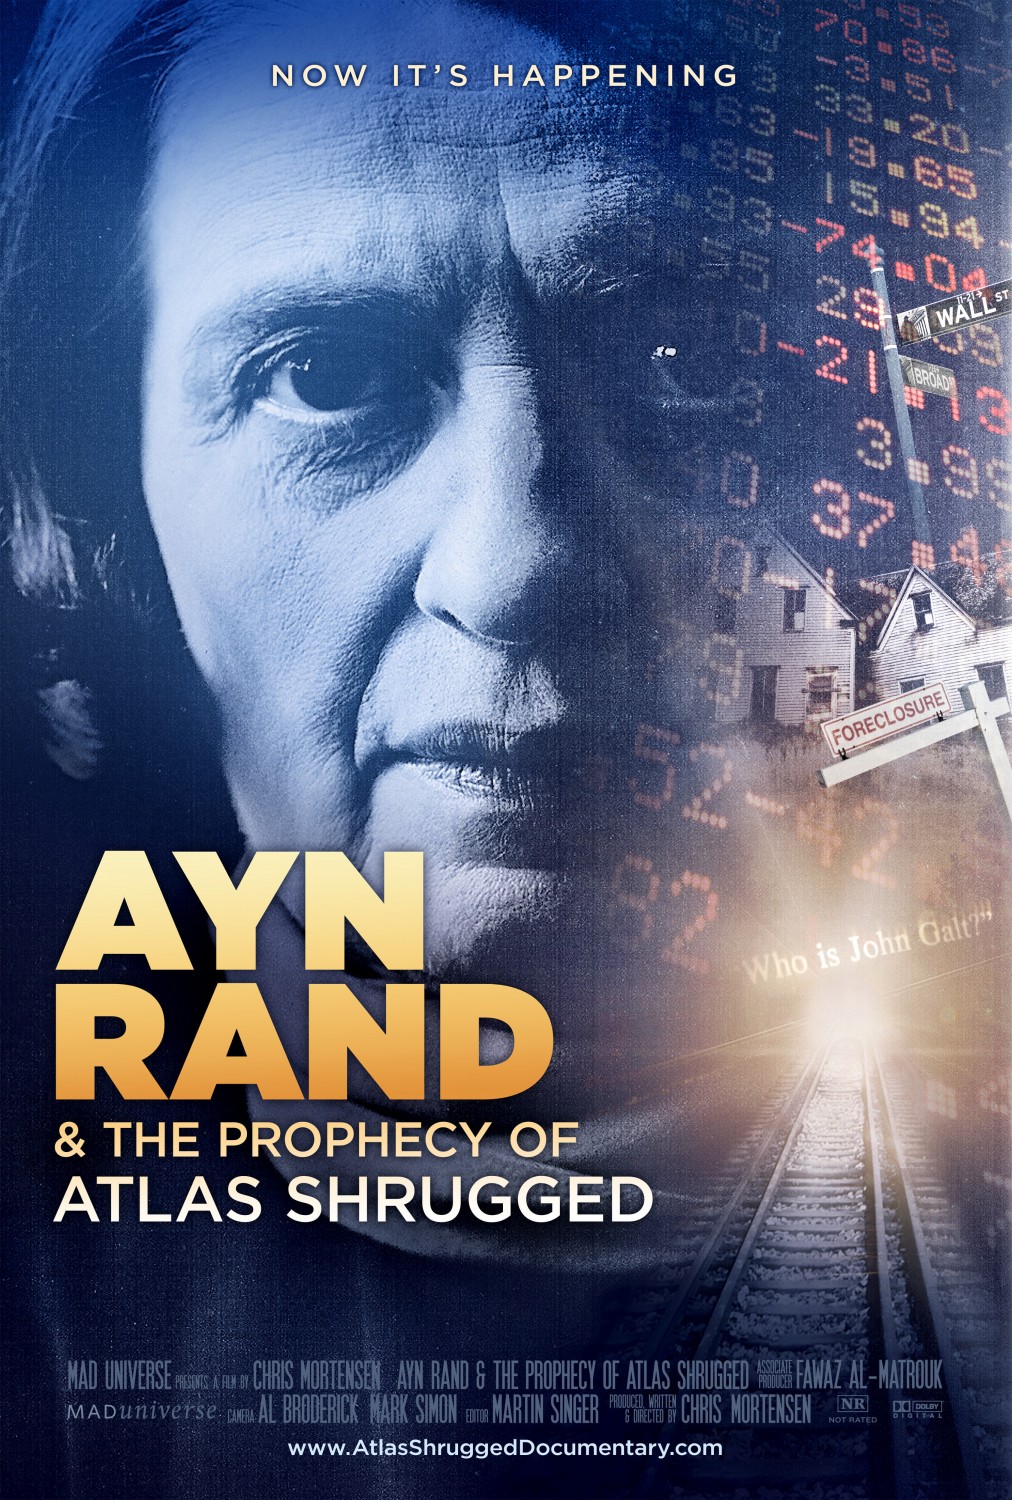 Extra Large Movie Poster Image for Ayn Rand & the Prophecy of Atlas Shrugged 